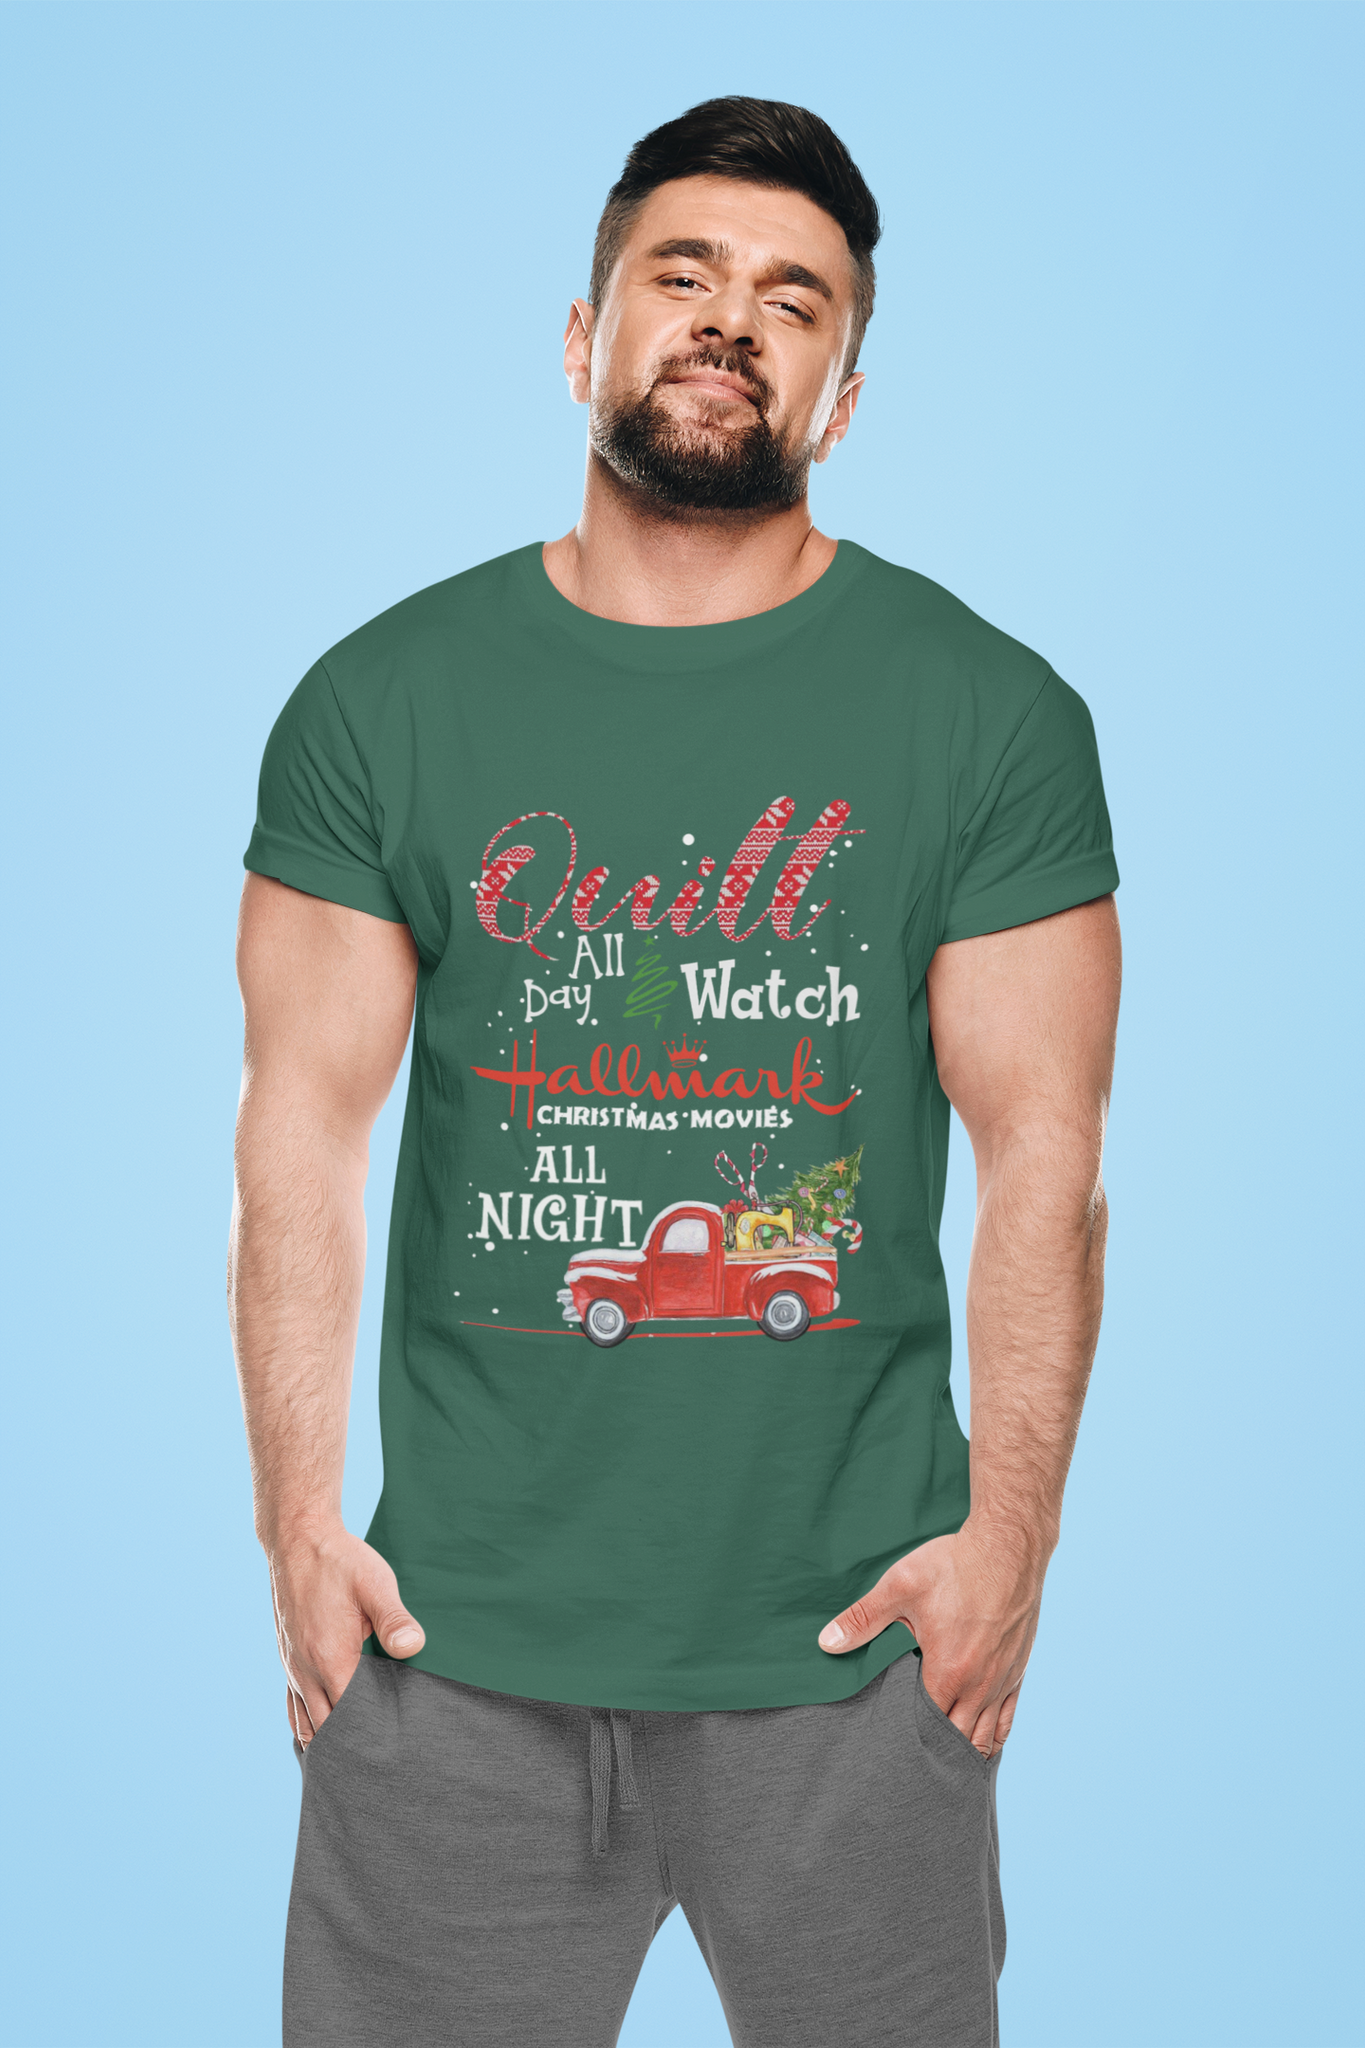 Hallmark Christmas T Shirt, Quilt All Day T Shirt, Watch Hallmark Christmas Movies All Night Tshirt, Christmas Gifts